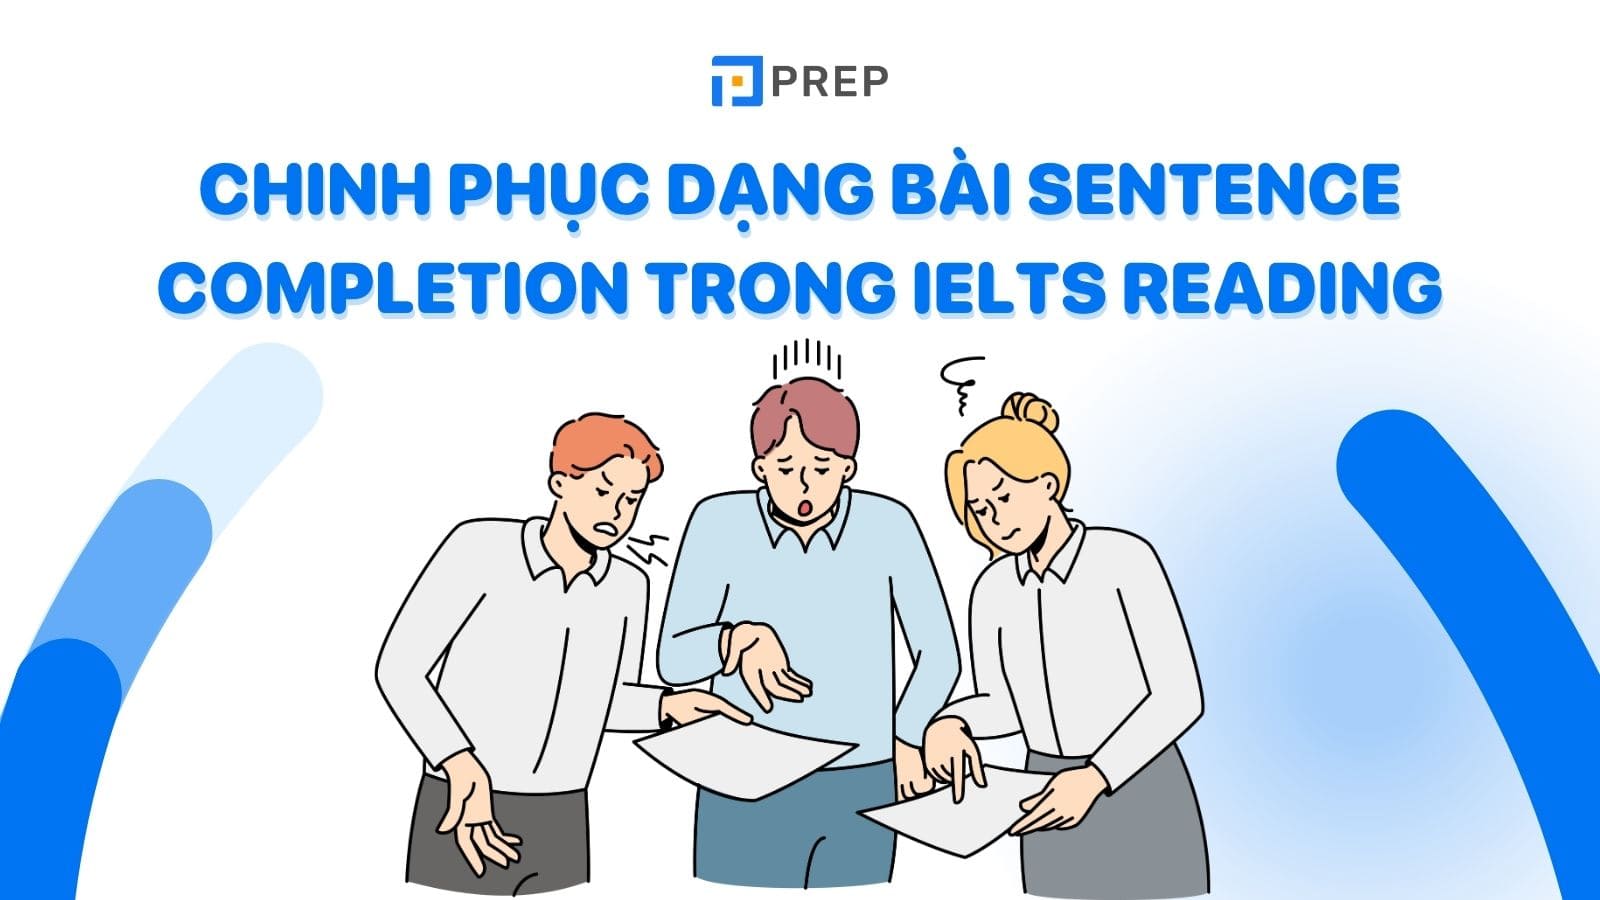 chinh-phuc-sentence-completion-trong-ielts-reading.jpg